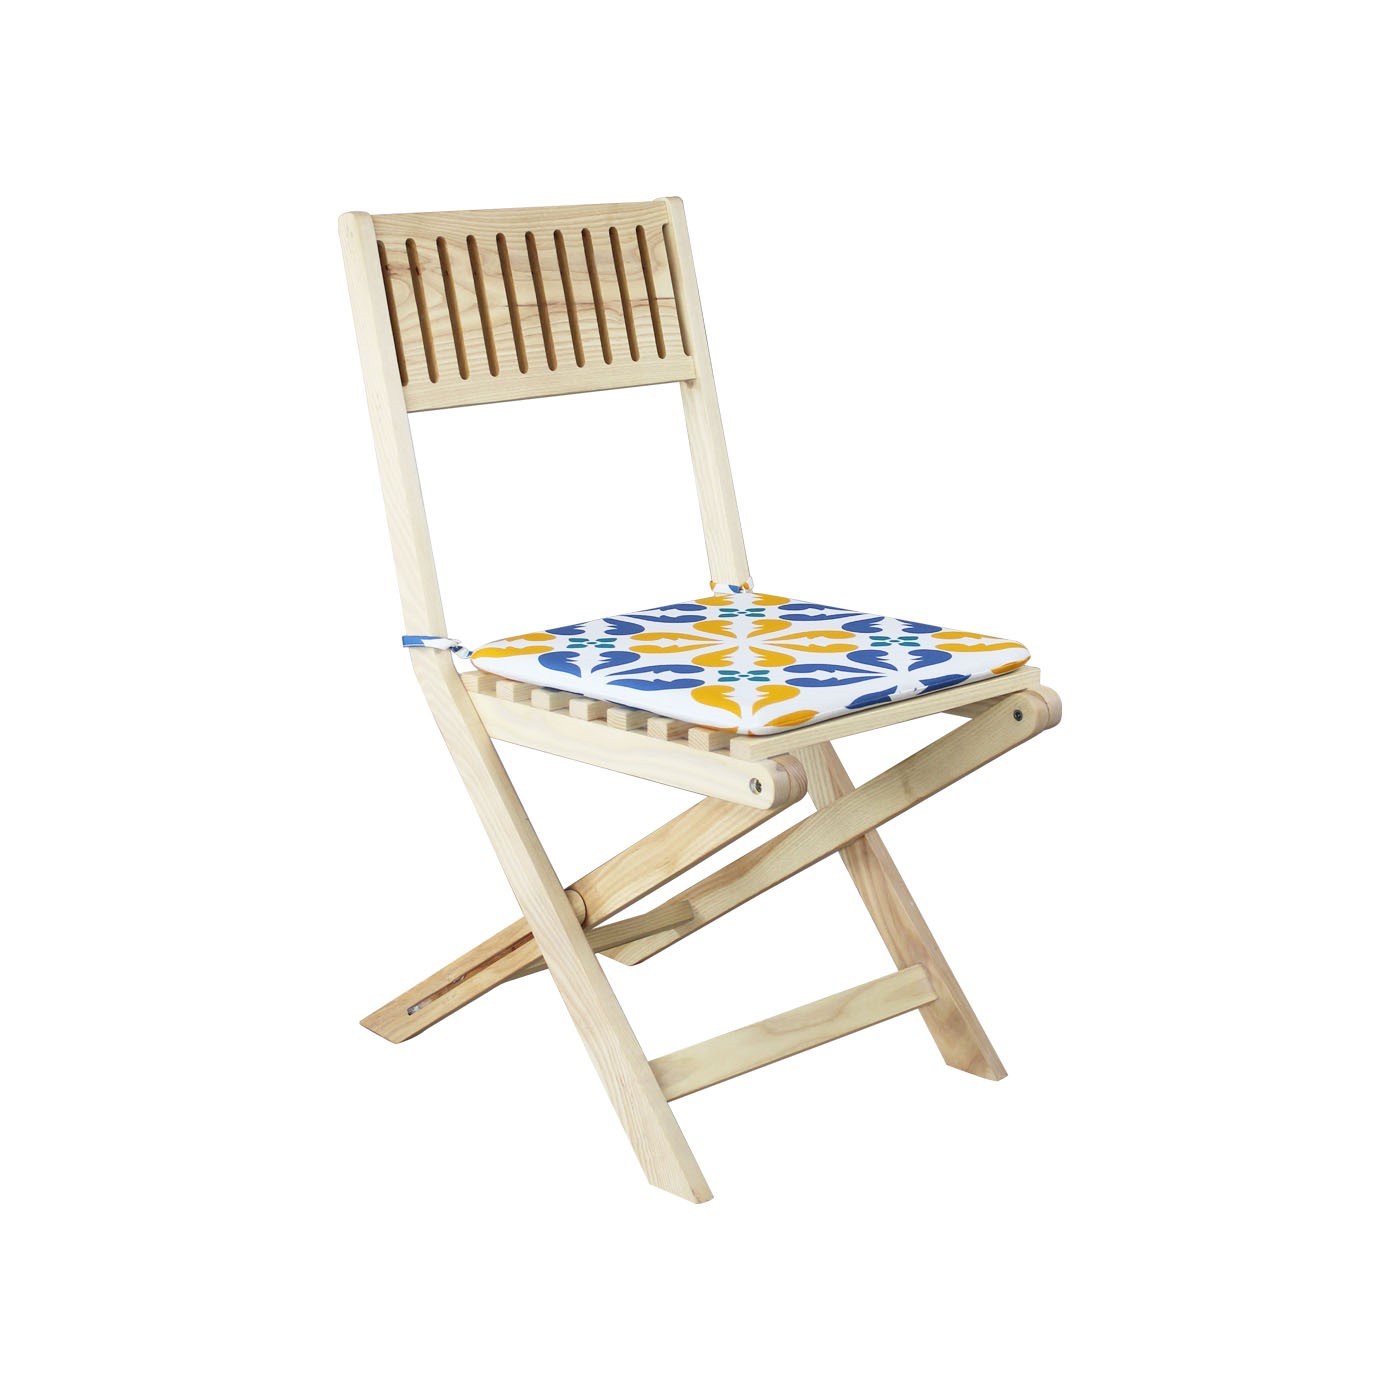 Palermo Blue & Yellow Floral Patterned Light Folding Chair